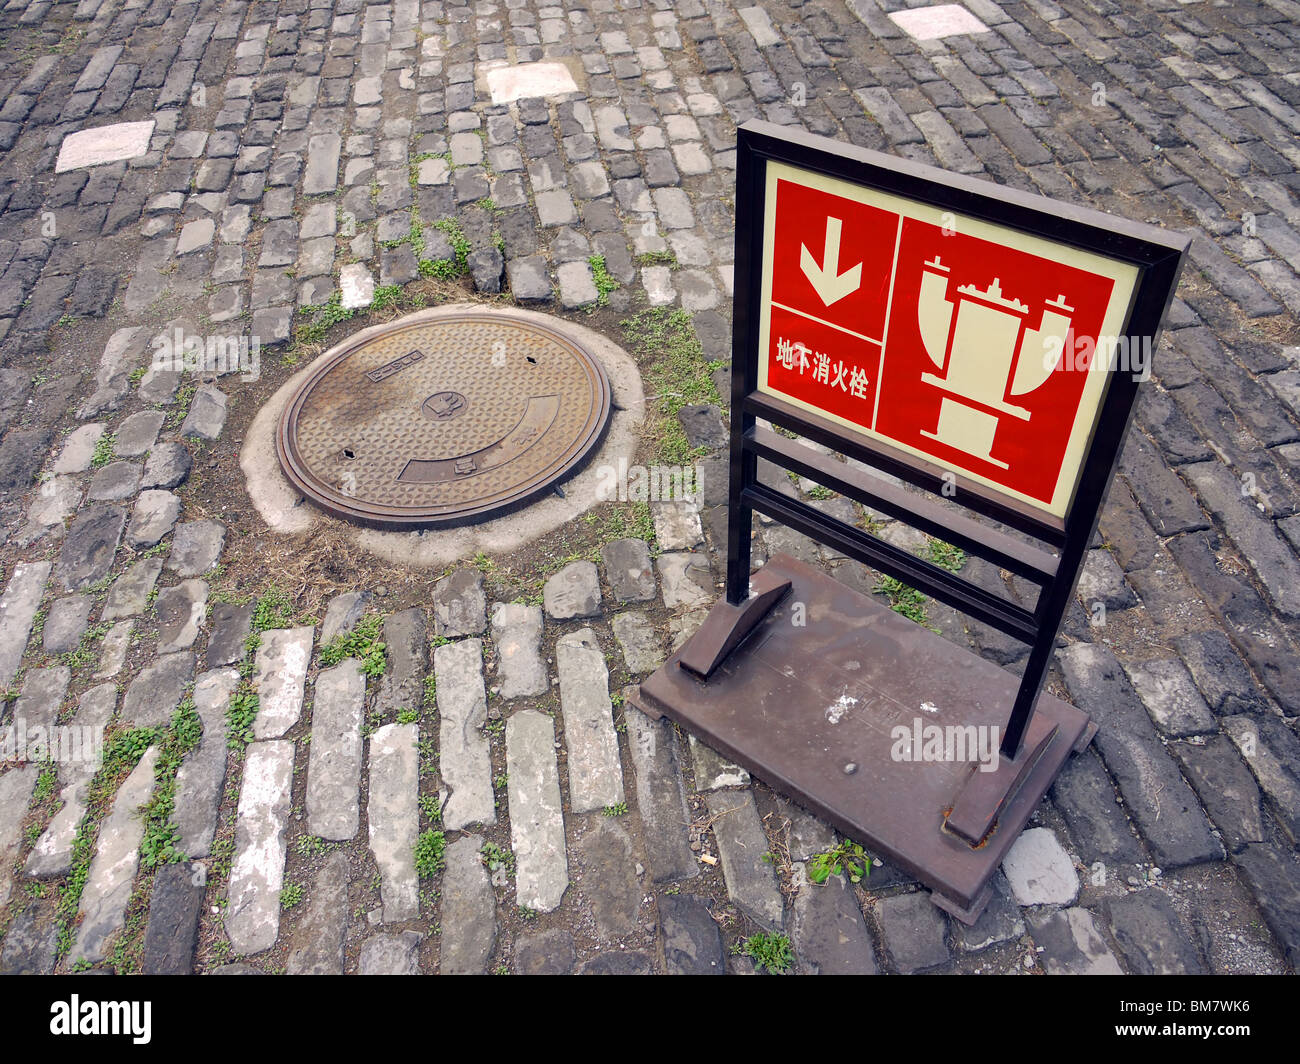 Red sign in Chinese pointing at the fire hydrant under sewer manhole on the Forbidden City territory in Beijing, China Stock Photo